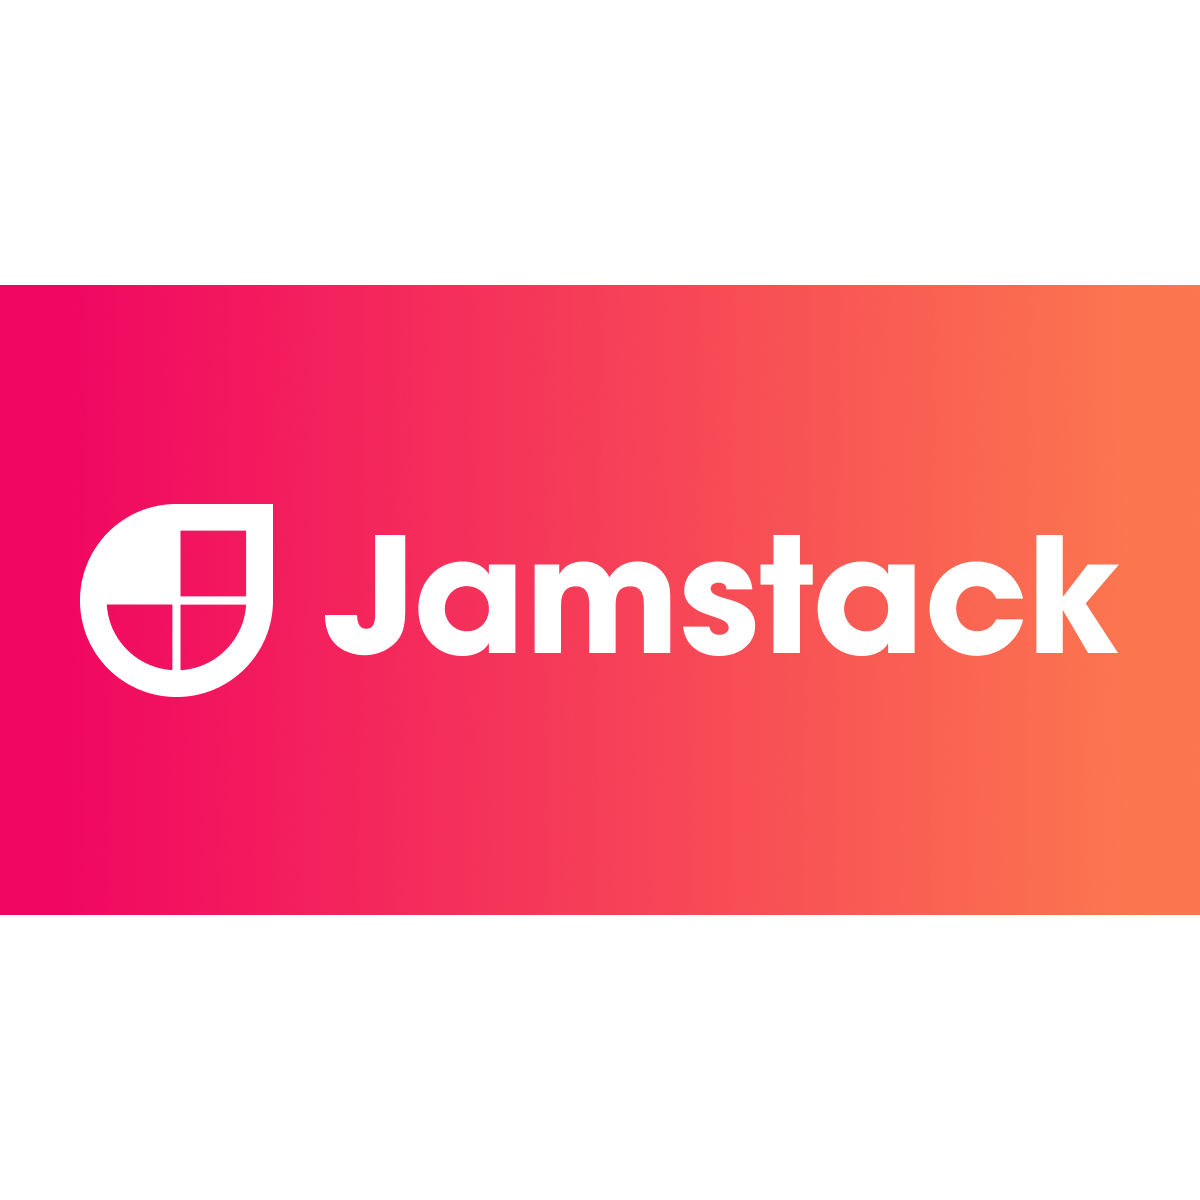 Why Jamstack?